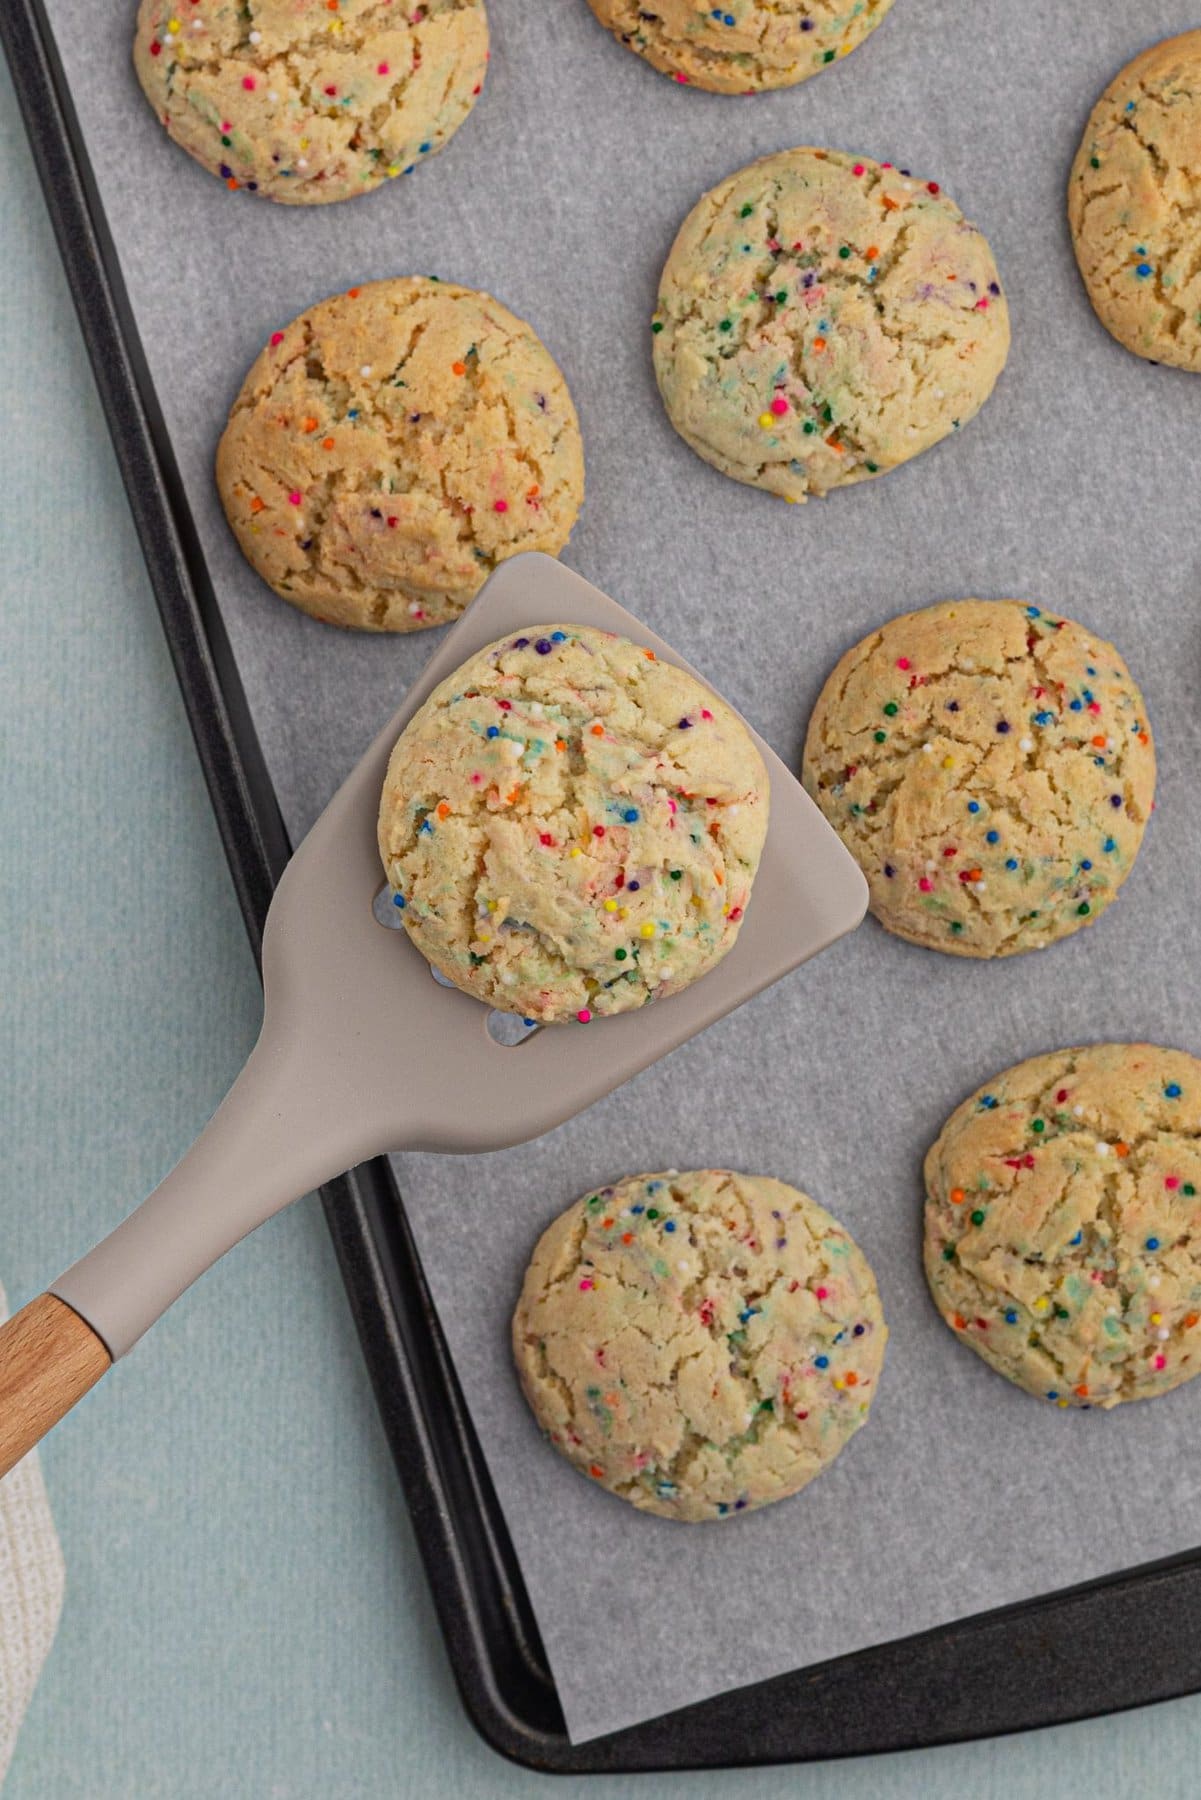 A parchment-lined baking sheet with baked sprinkle cookies. One cookie is being lifted out on a silicone spatula.